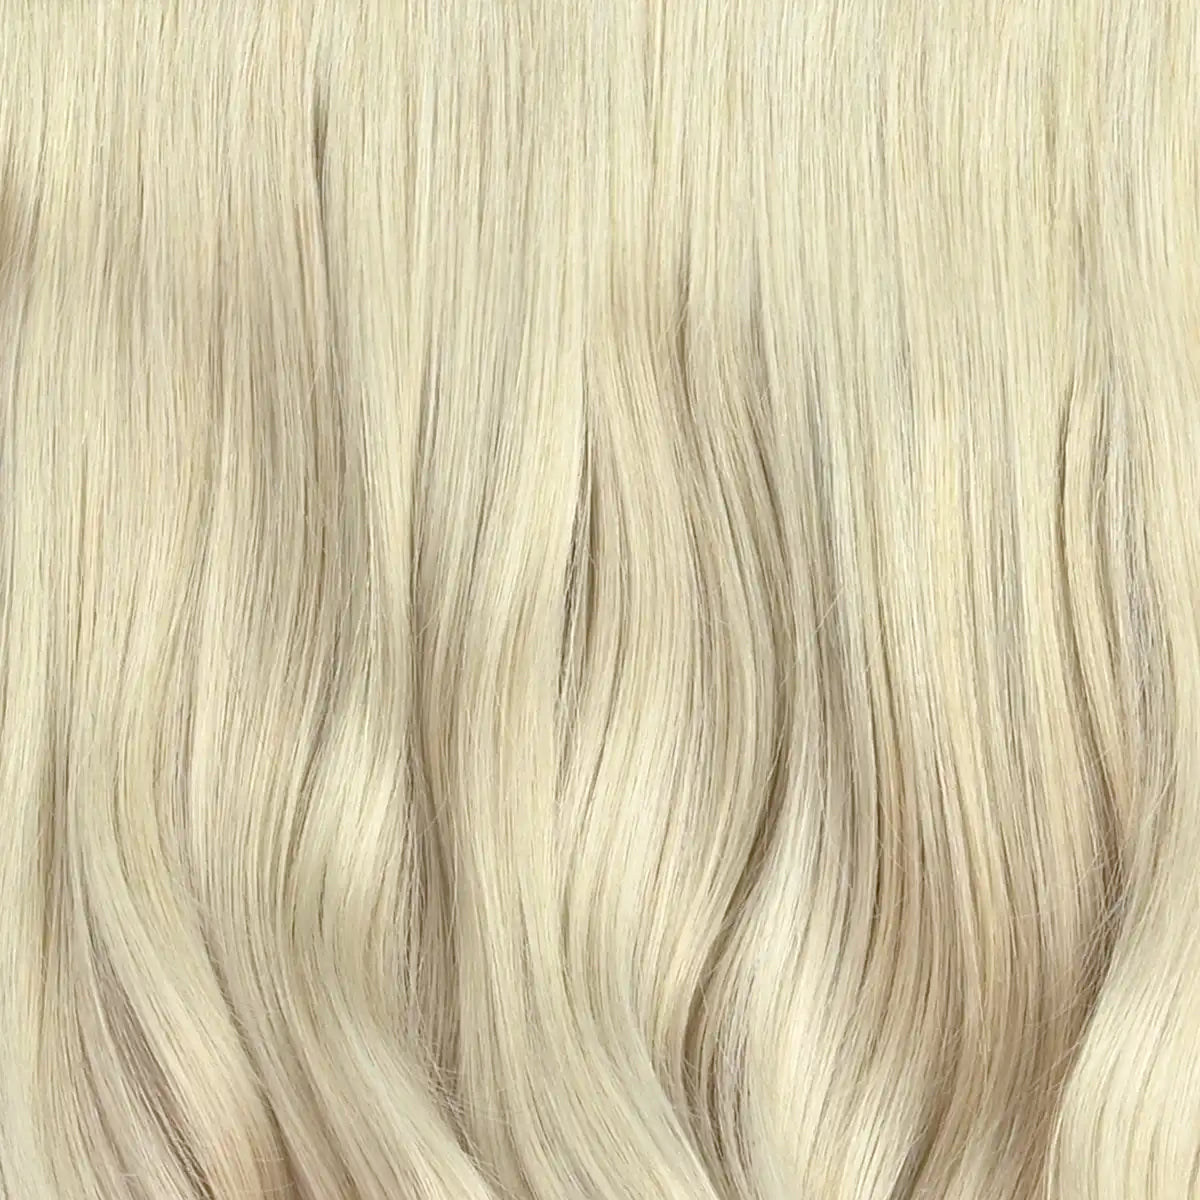 Ice Blonde clip-in hairextensions 🧊 30cm - 230g